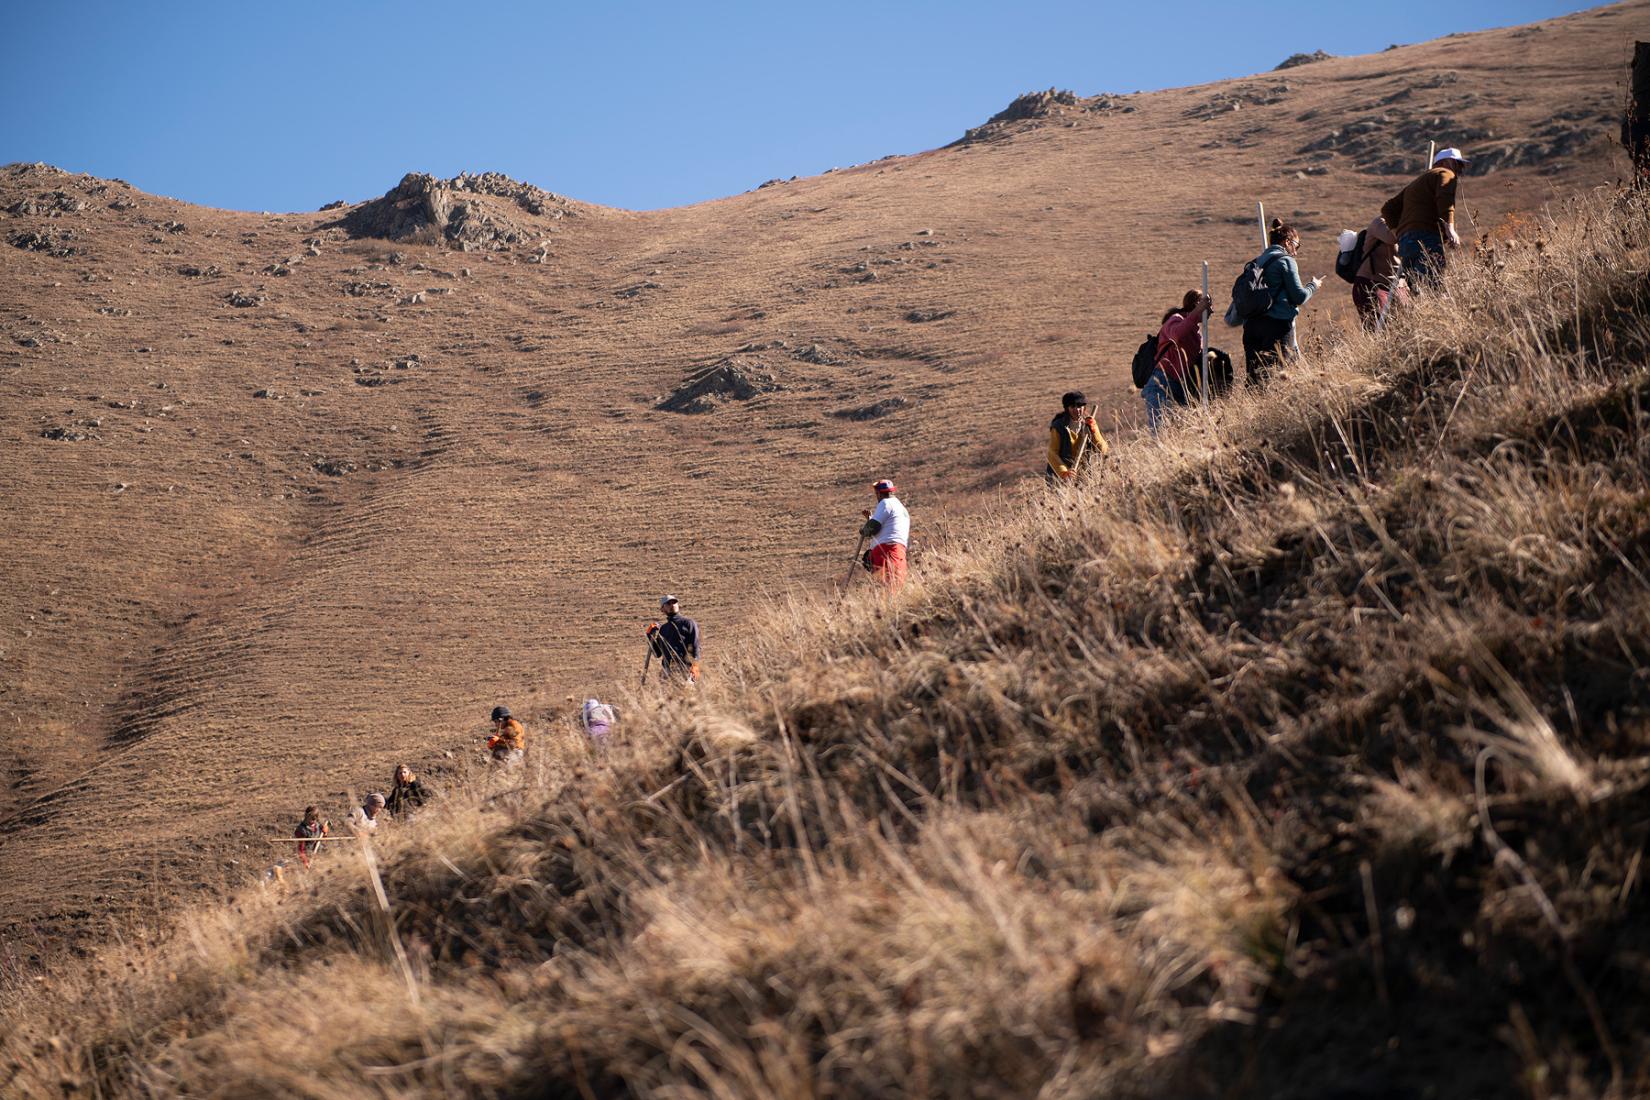 People climbing the hill.